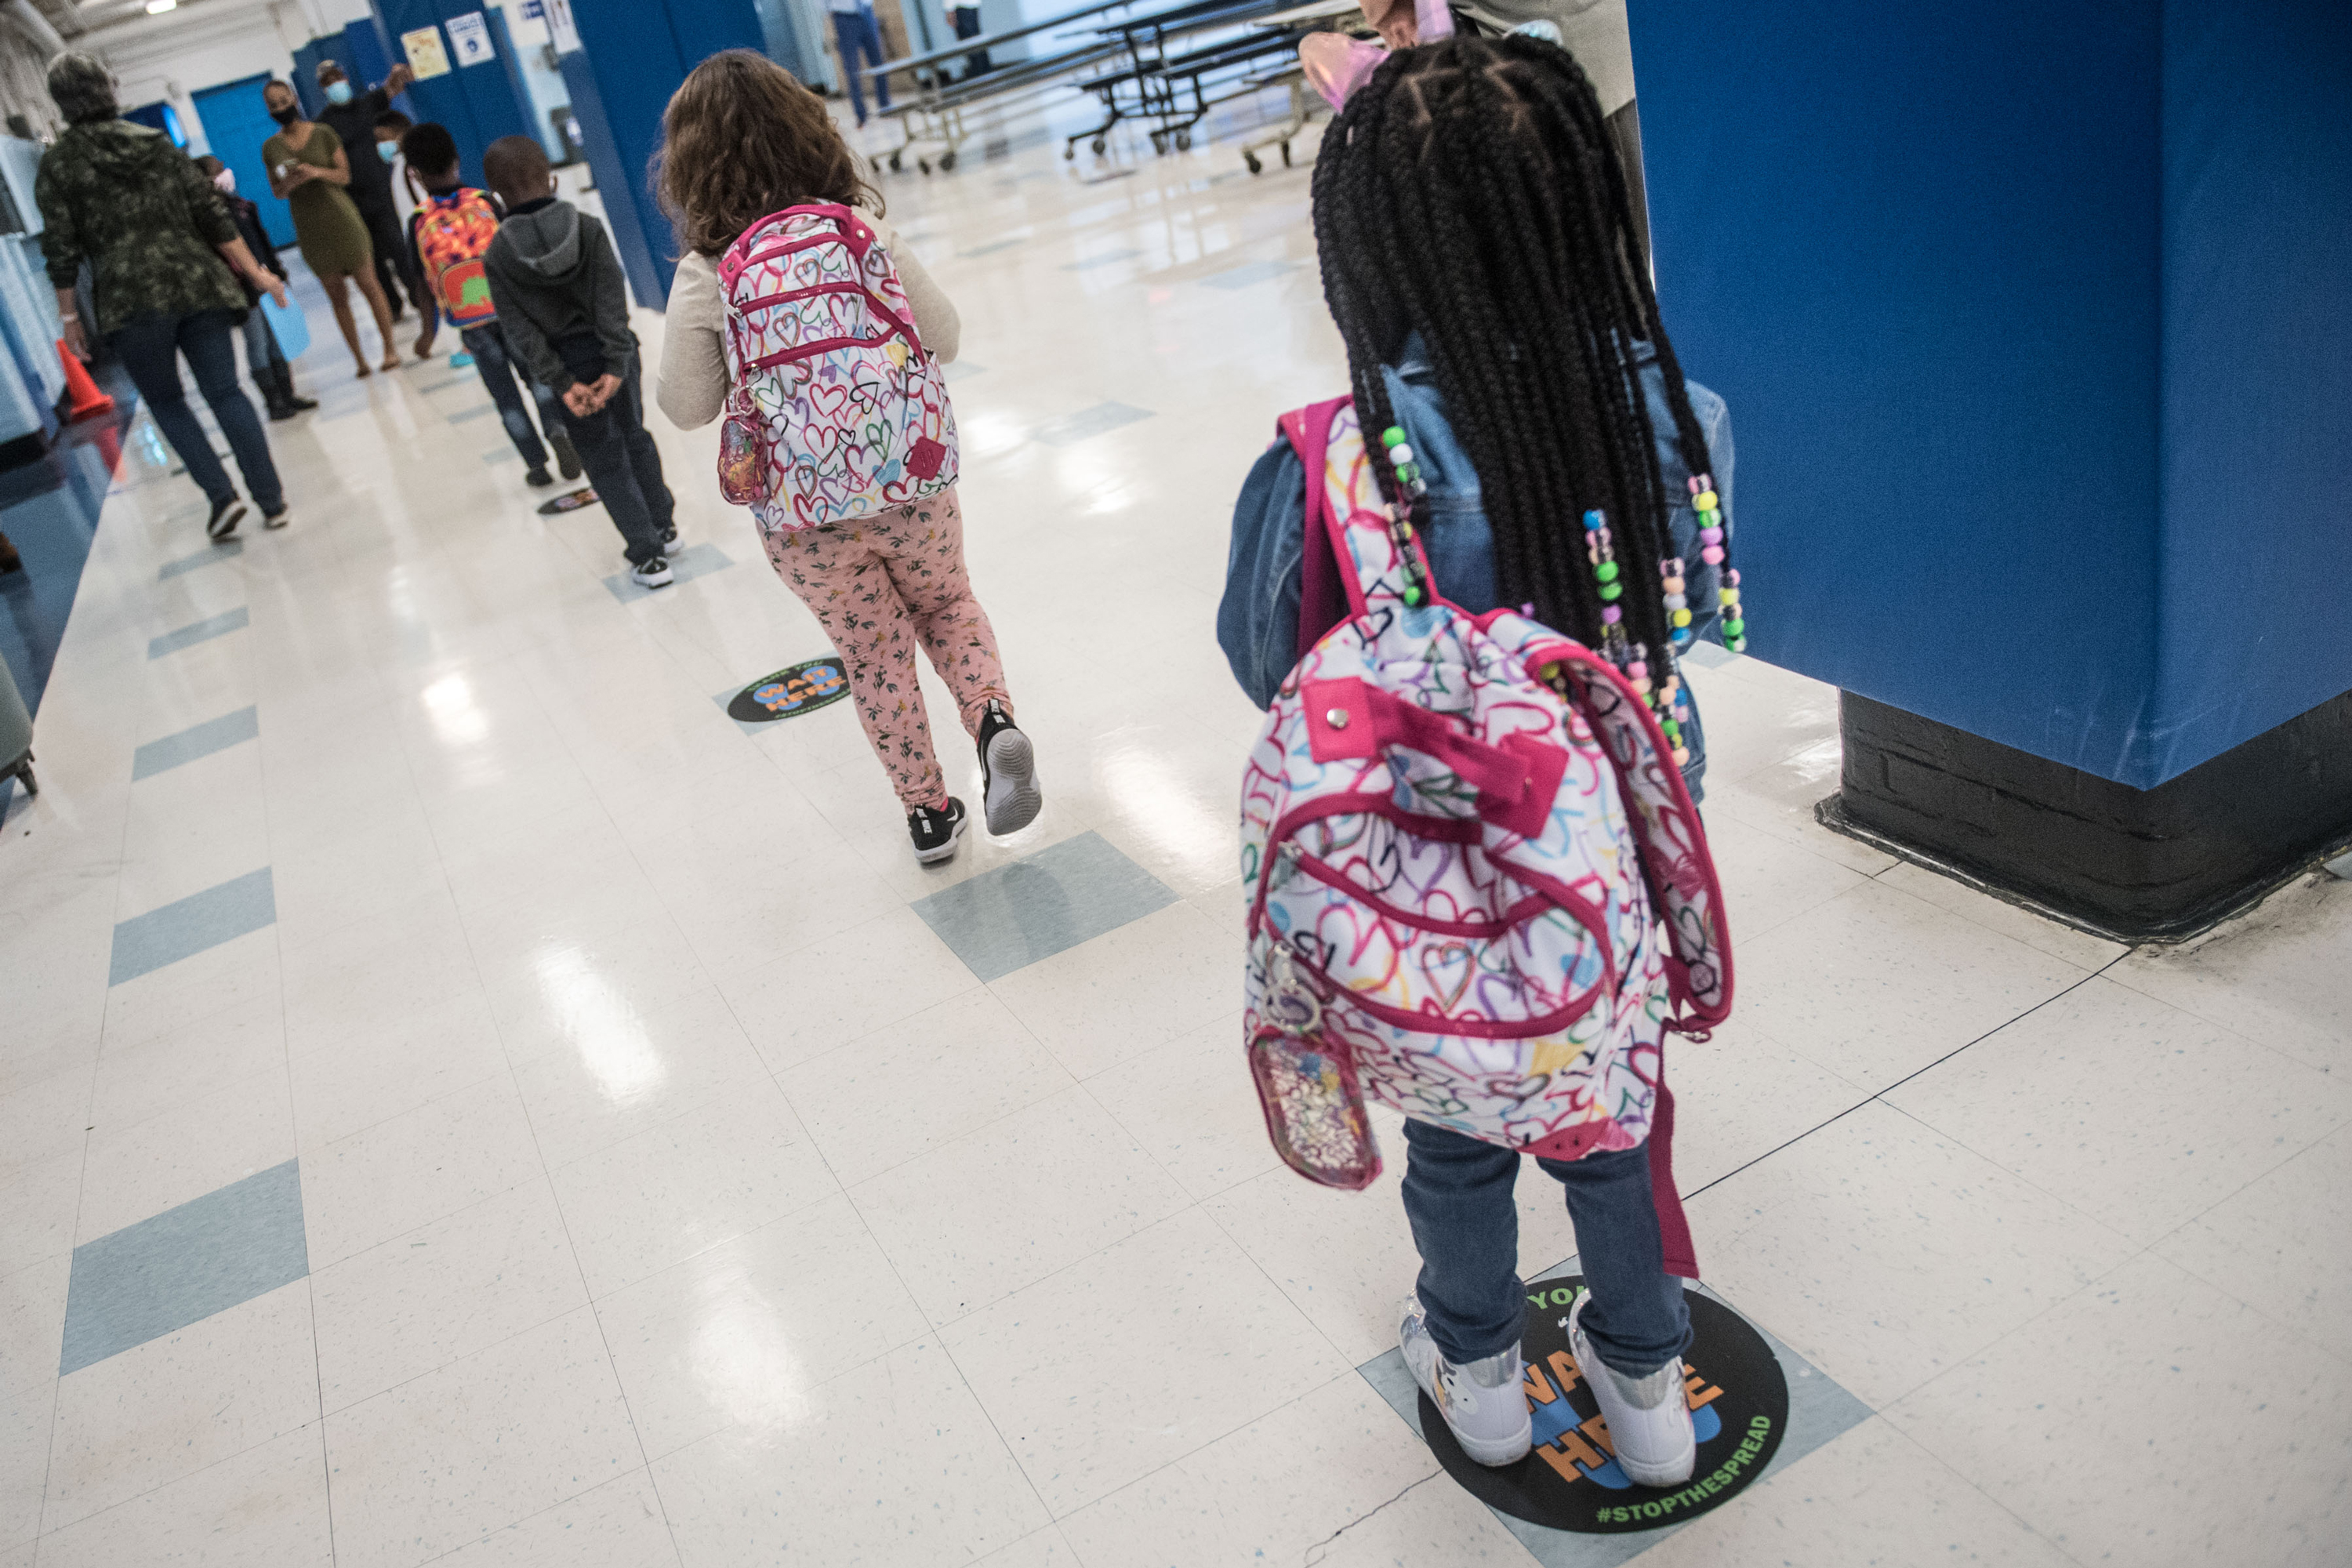 Socially distanced students on the first day of school last year at P.S. 188 in Manhattan. Sept. 29, 2020.